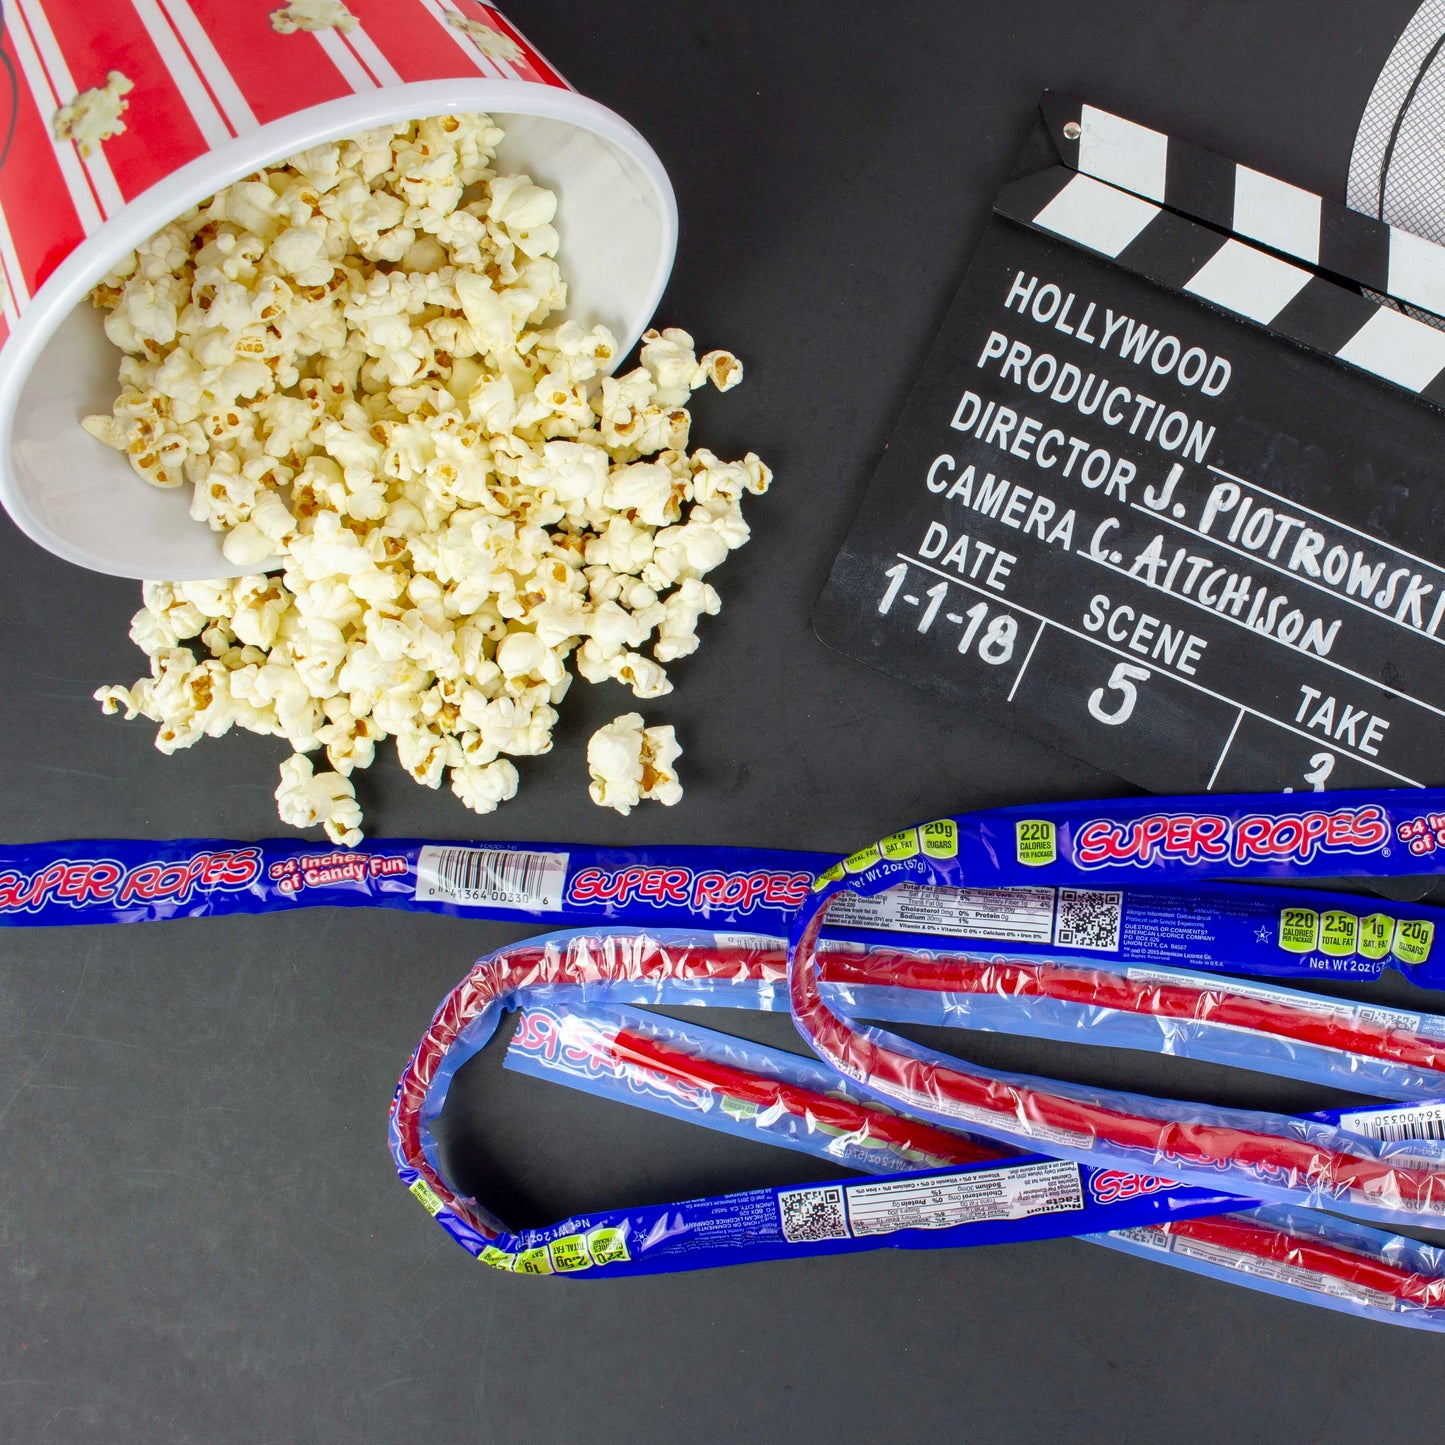 SUPER ROPES with popcorn and movie clapboard